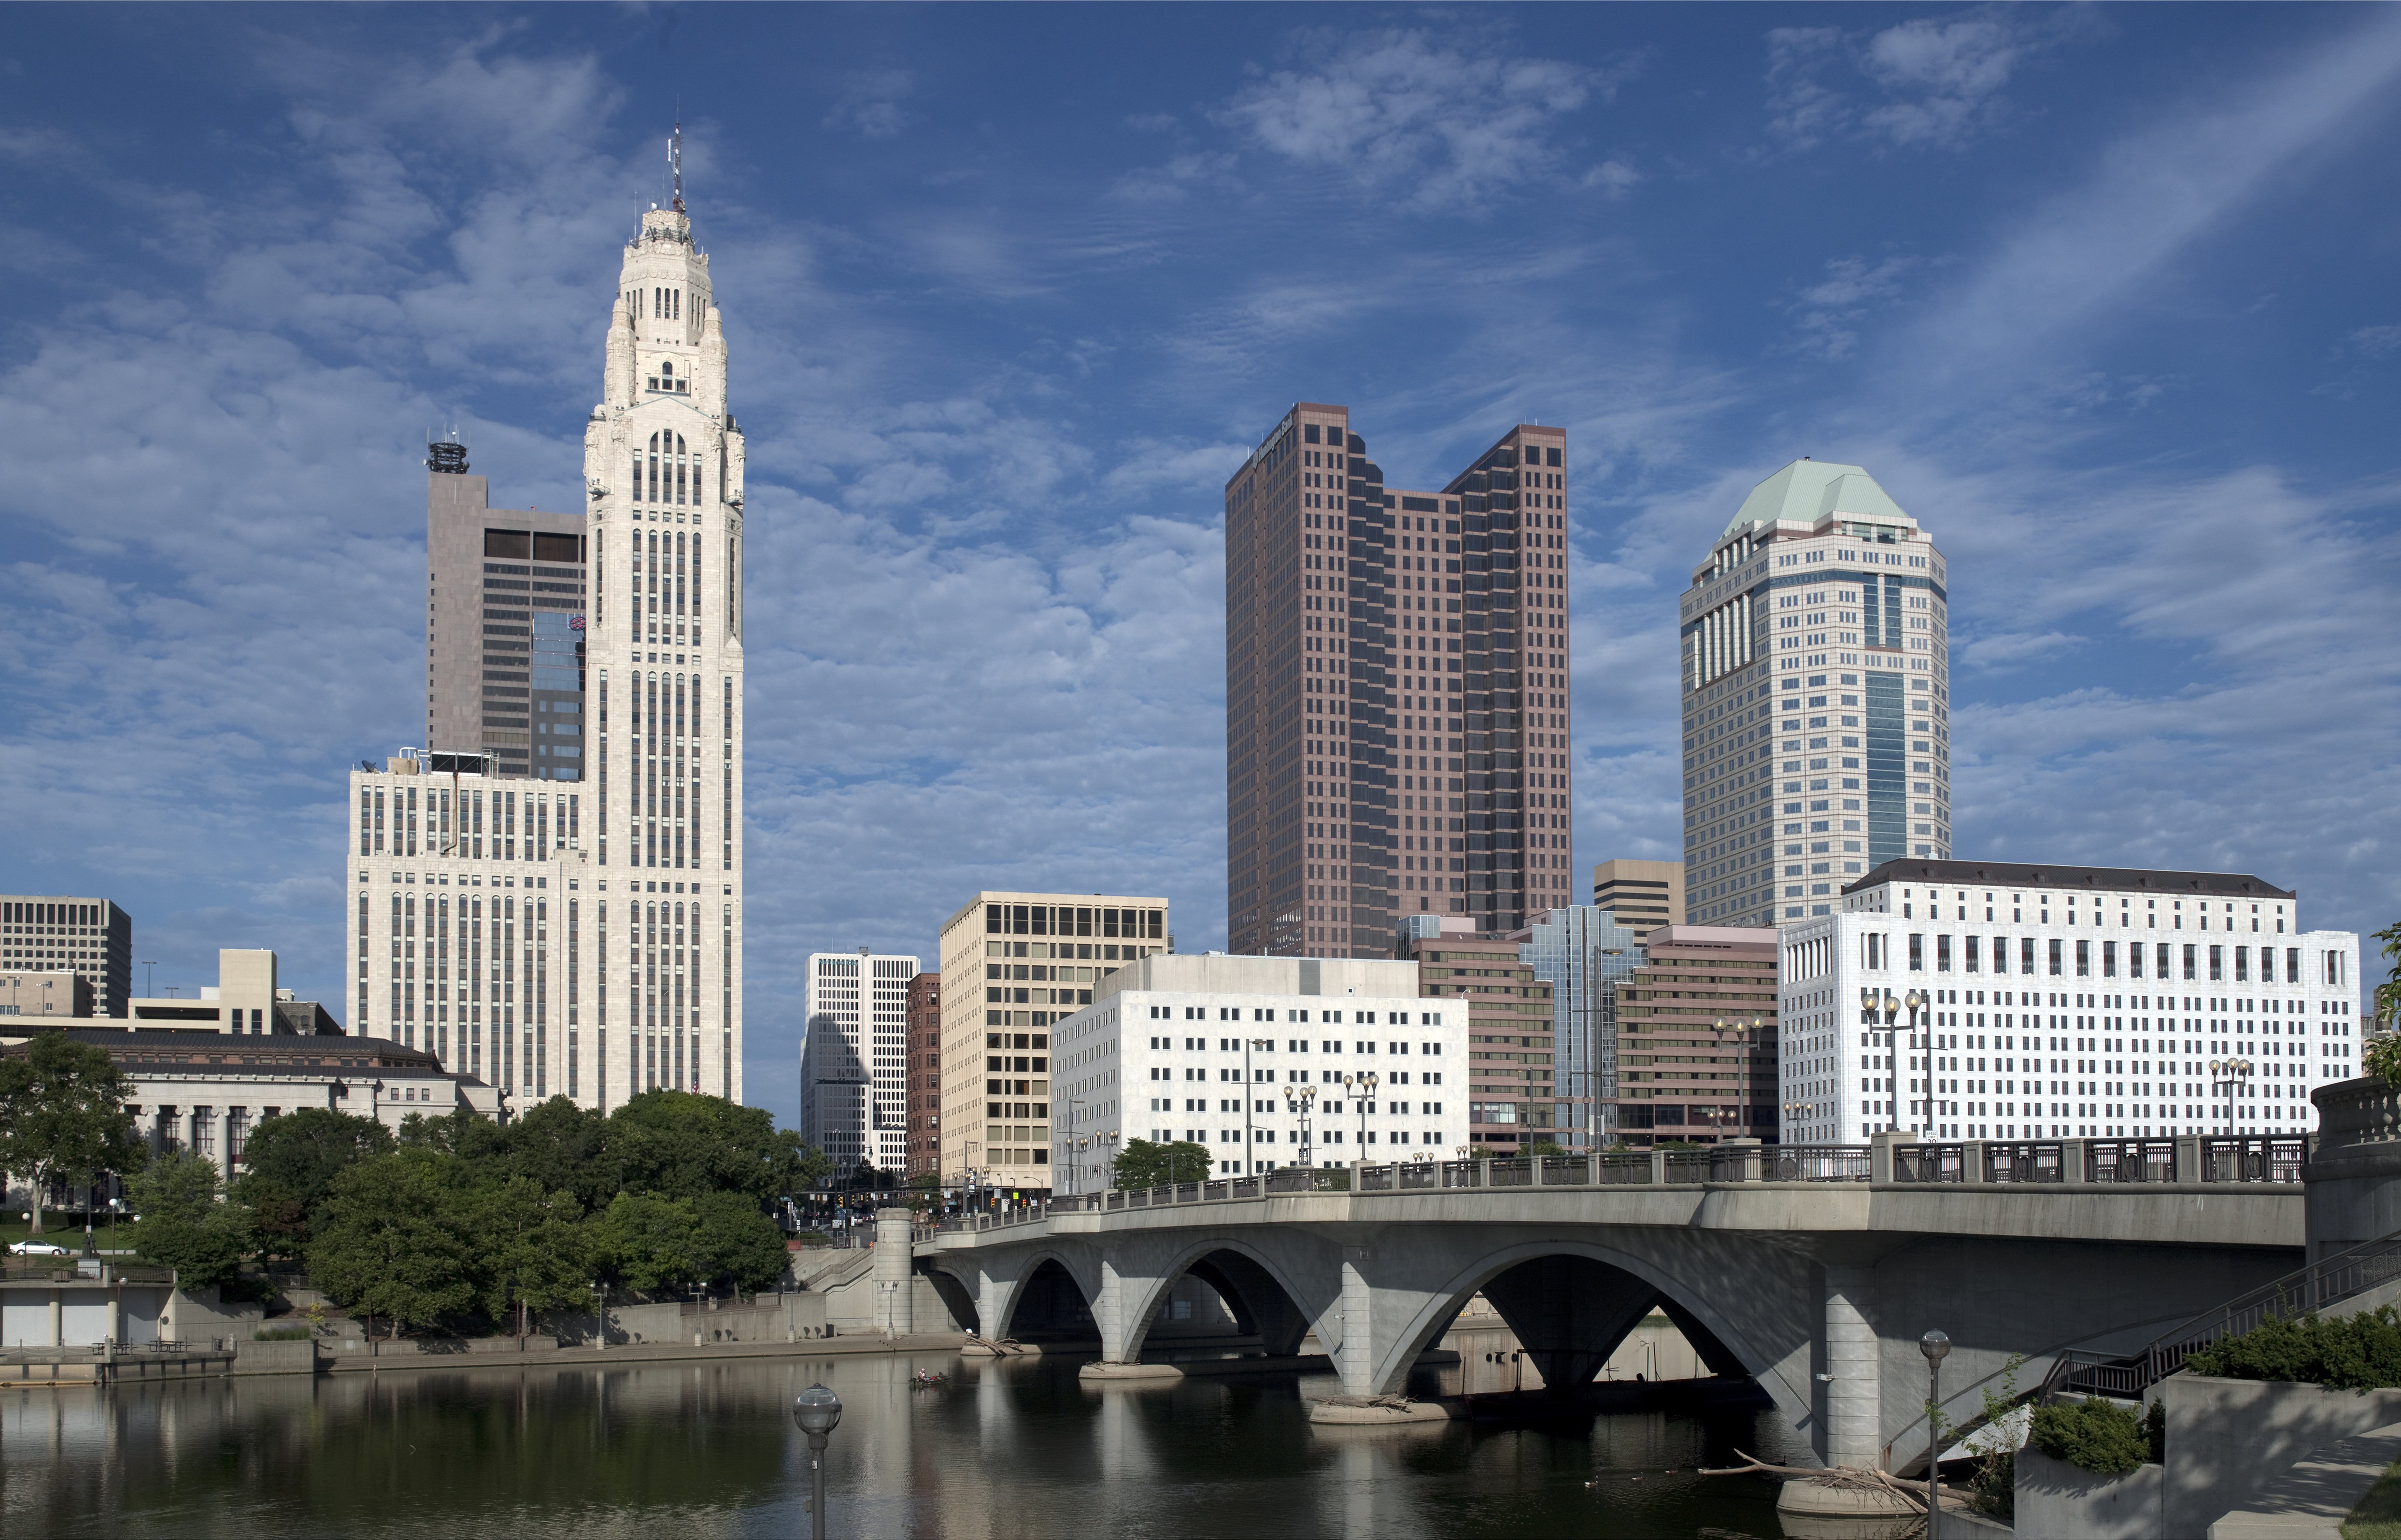 Starry Internet Launches in Columbus Ohio – Residents Can Lock in $25 Rate for Life